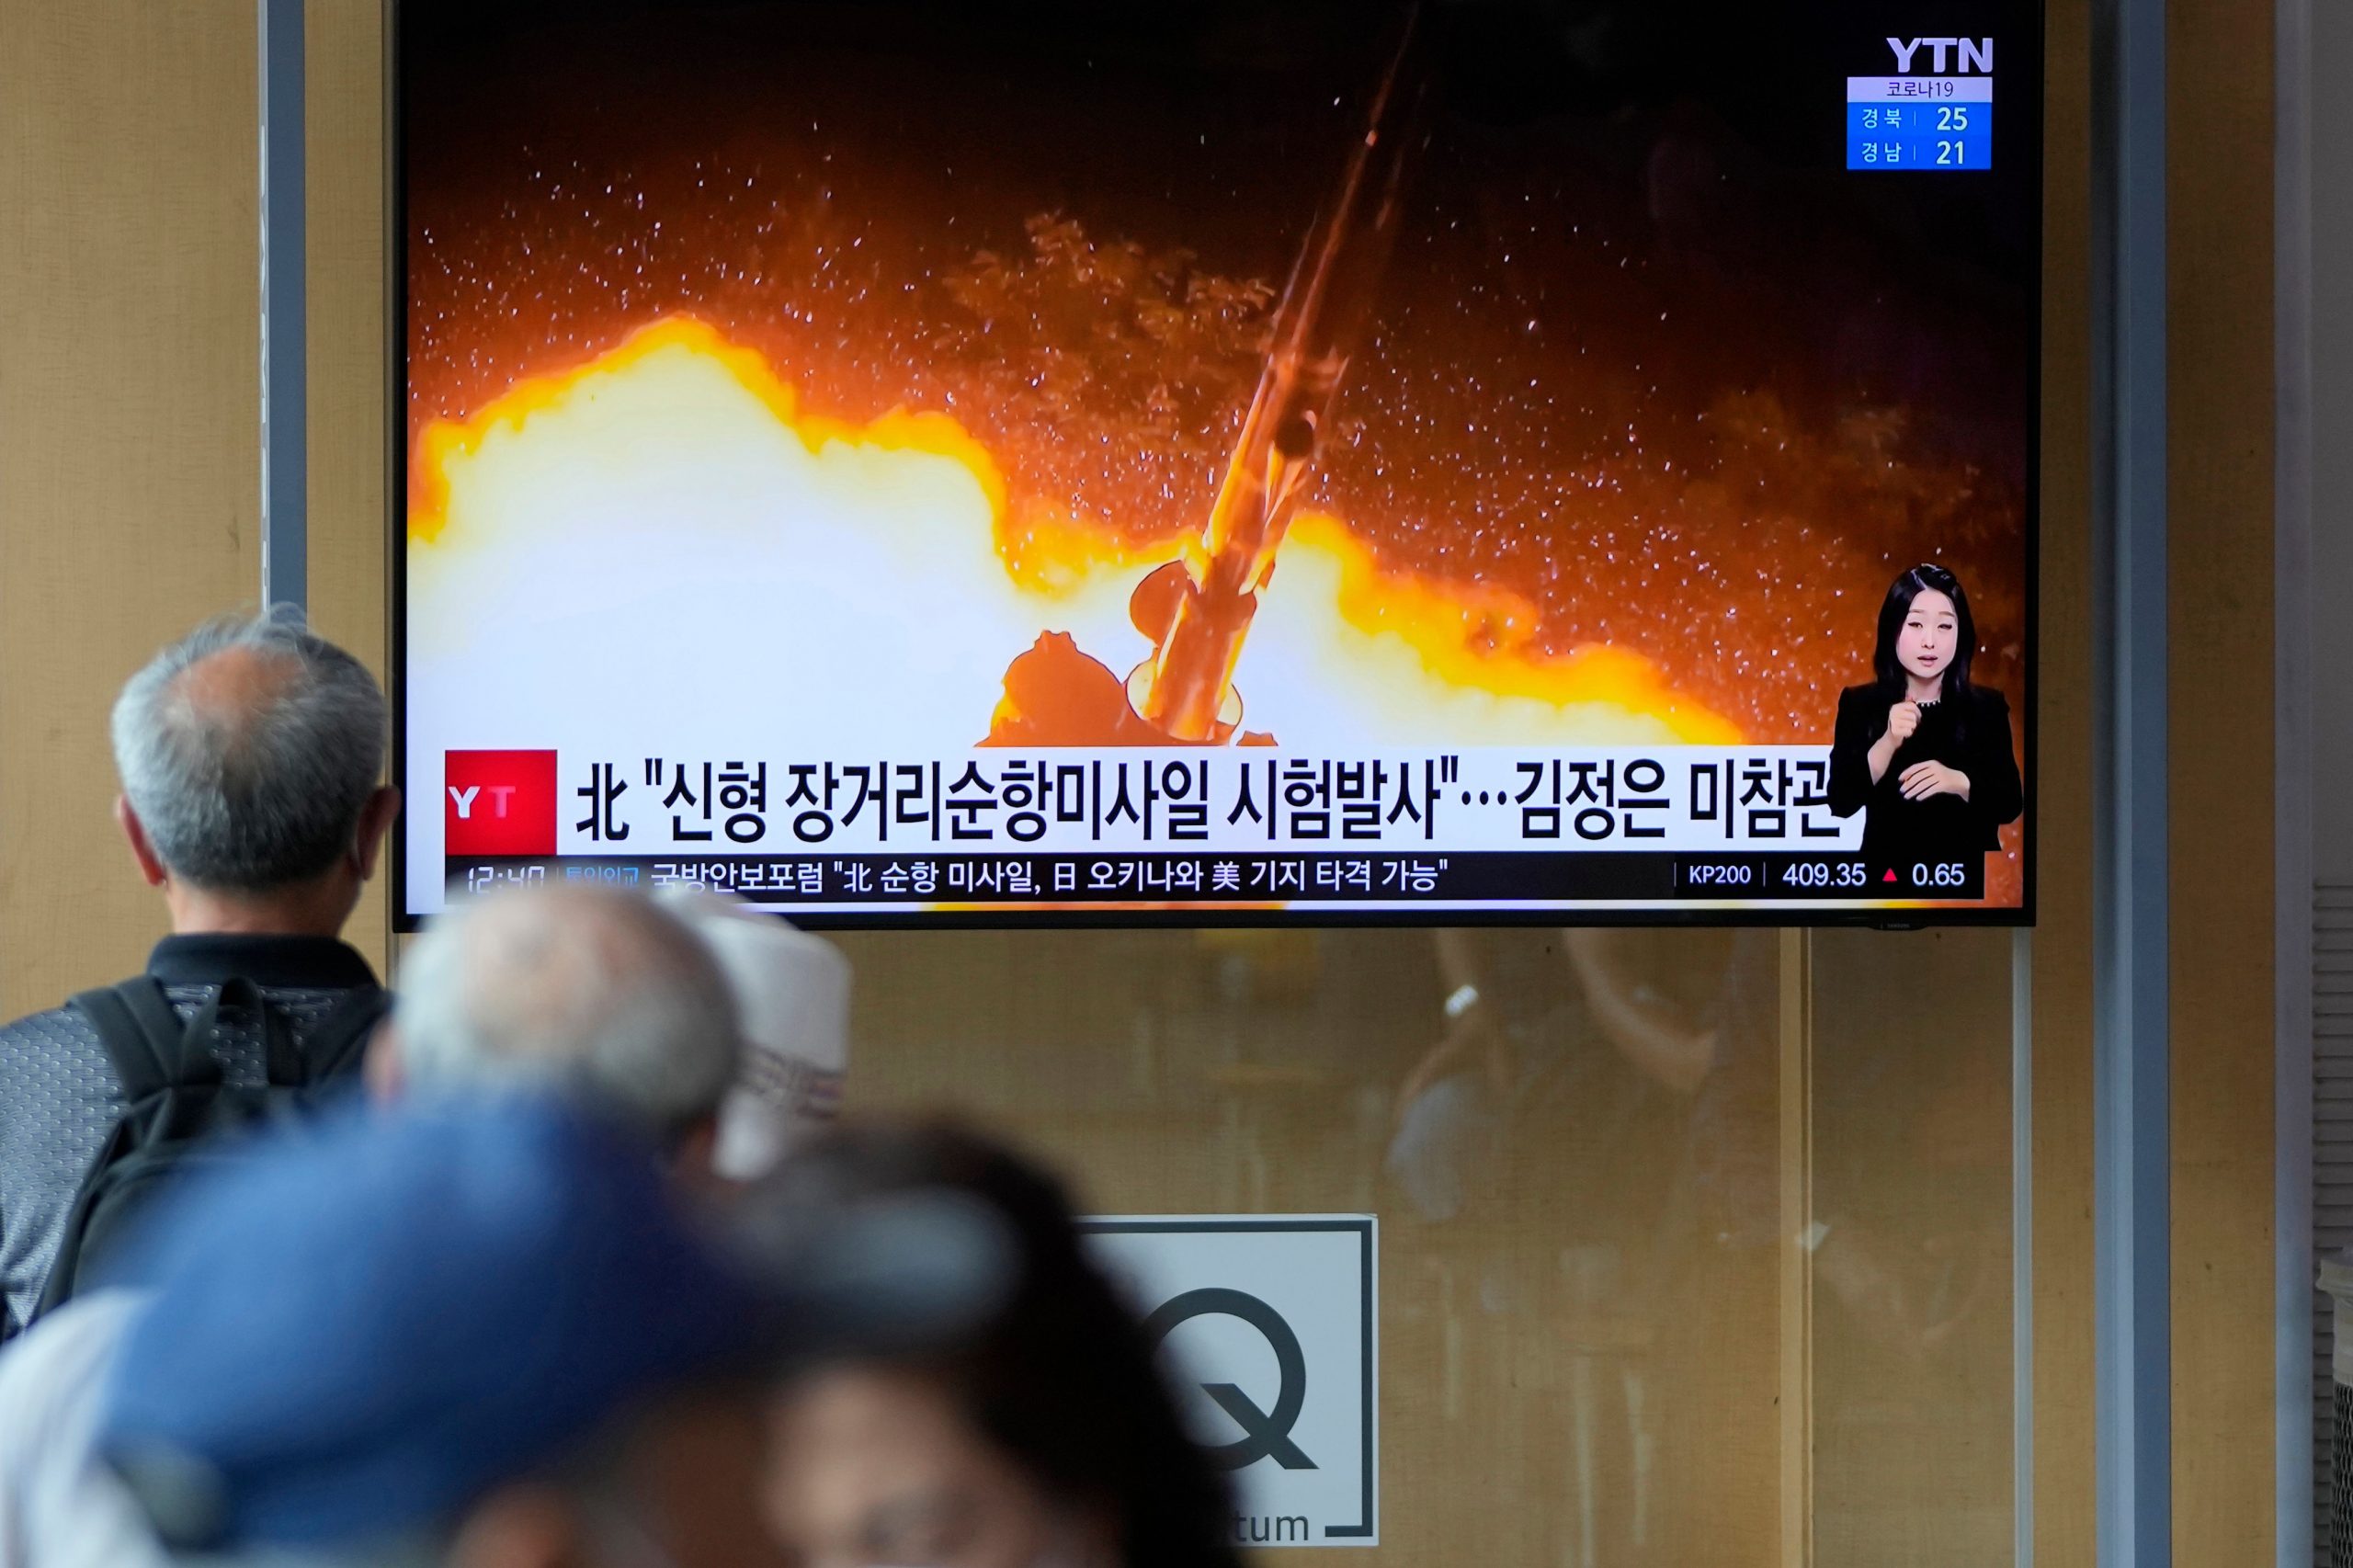 All about new long-range cruise missiles North Korea says it tested this week